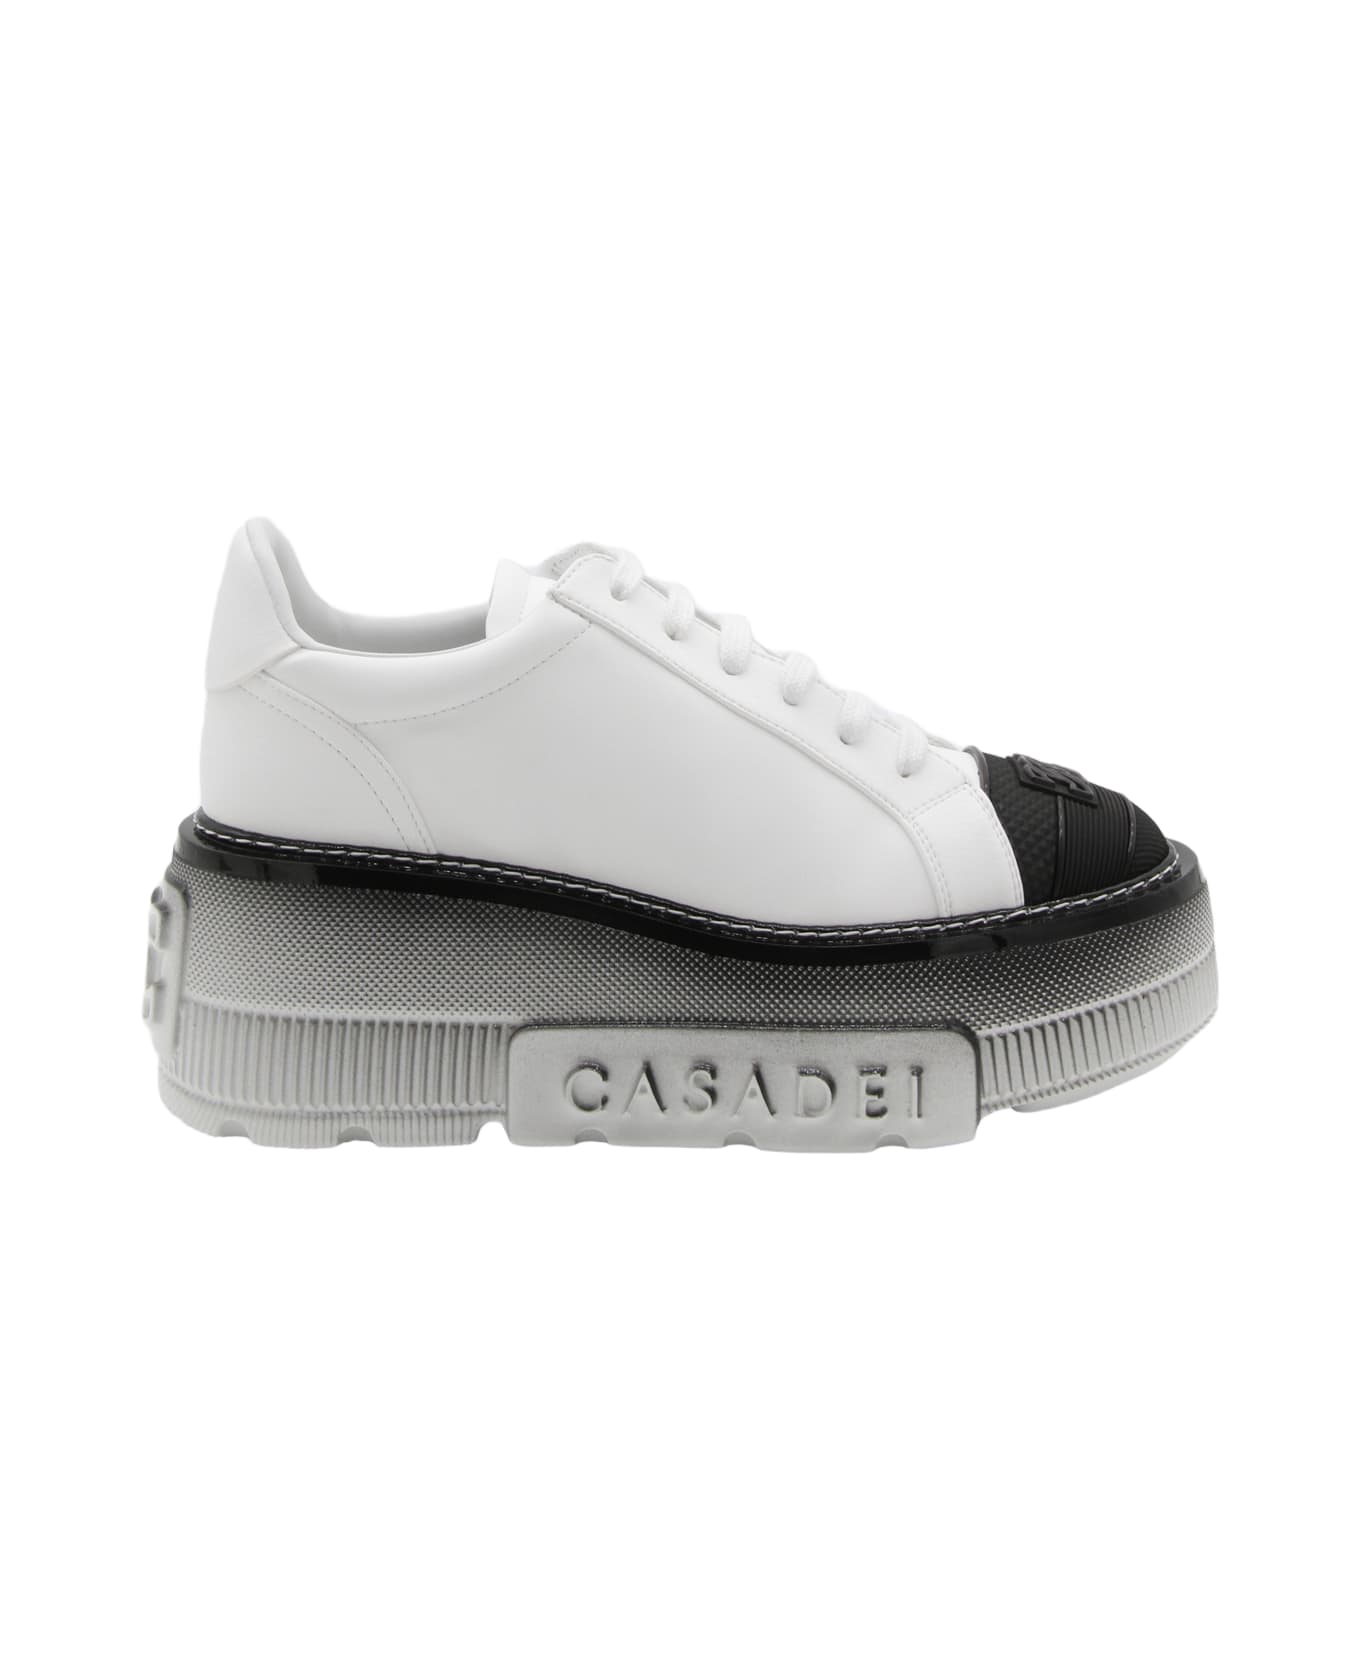 Casadei White And Black Leather Sneakers - White